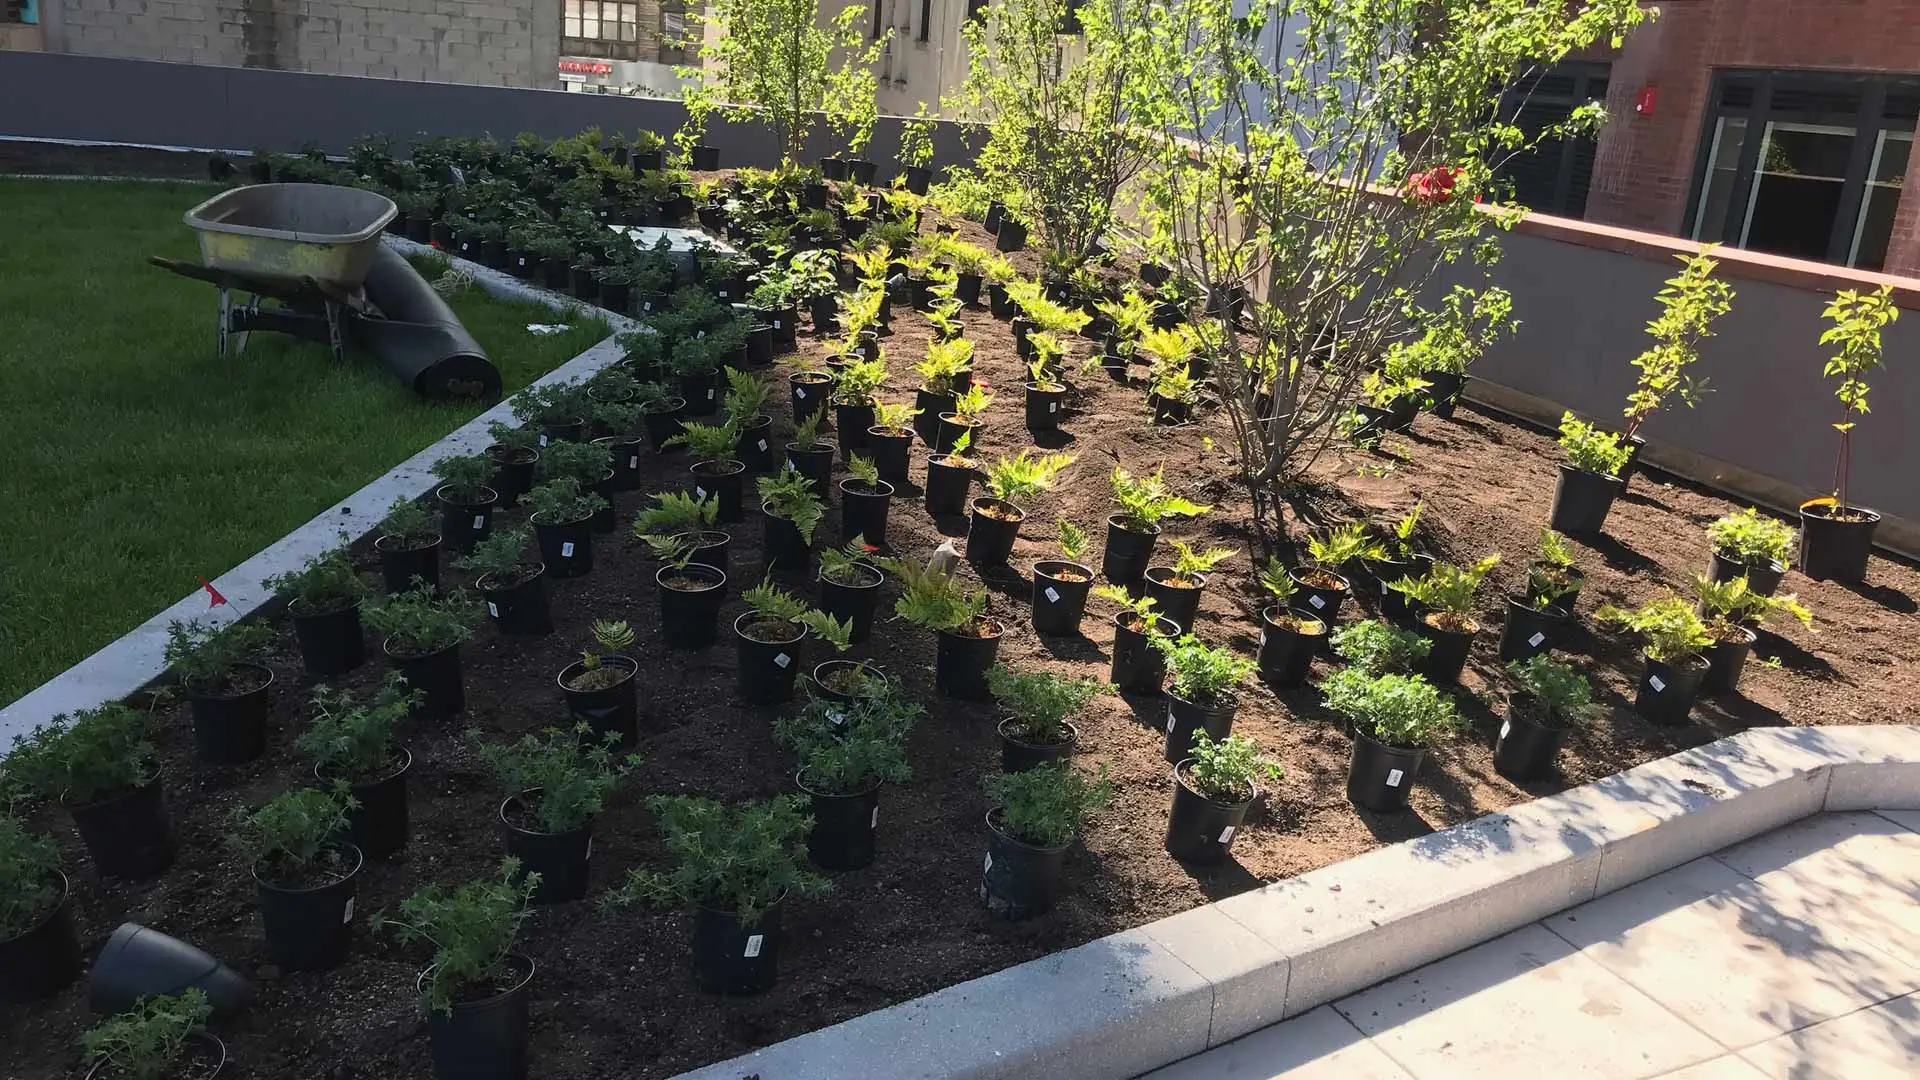 A commercial property having a landscape bed installed in The Bronx, NY.